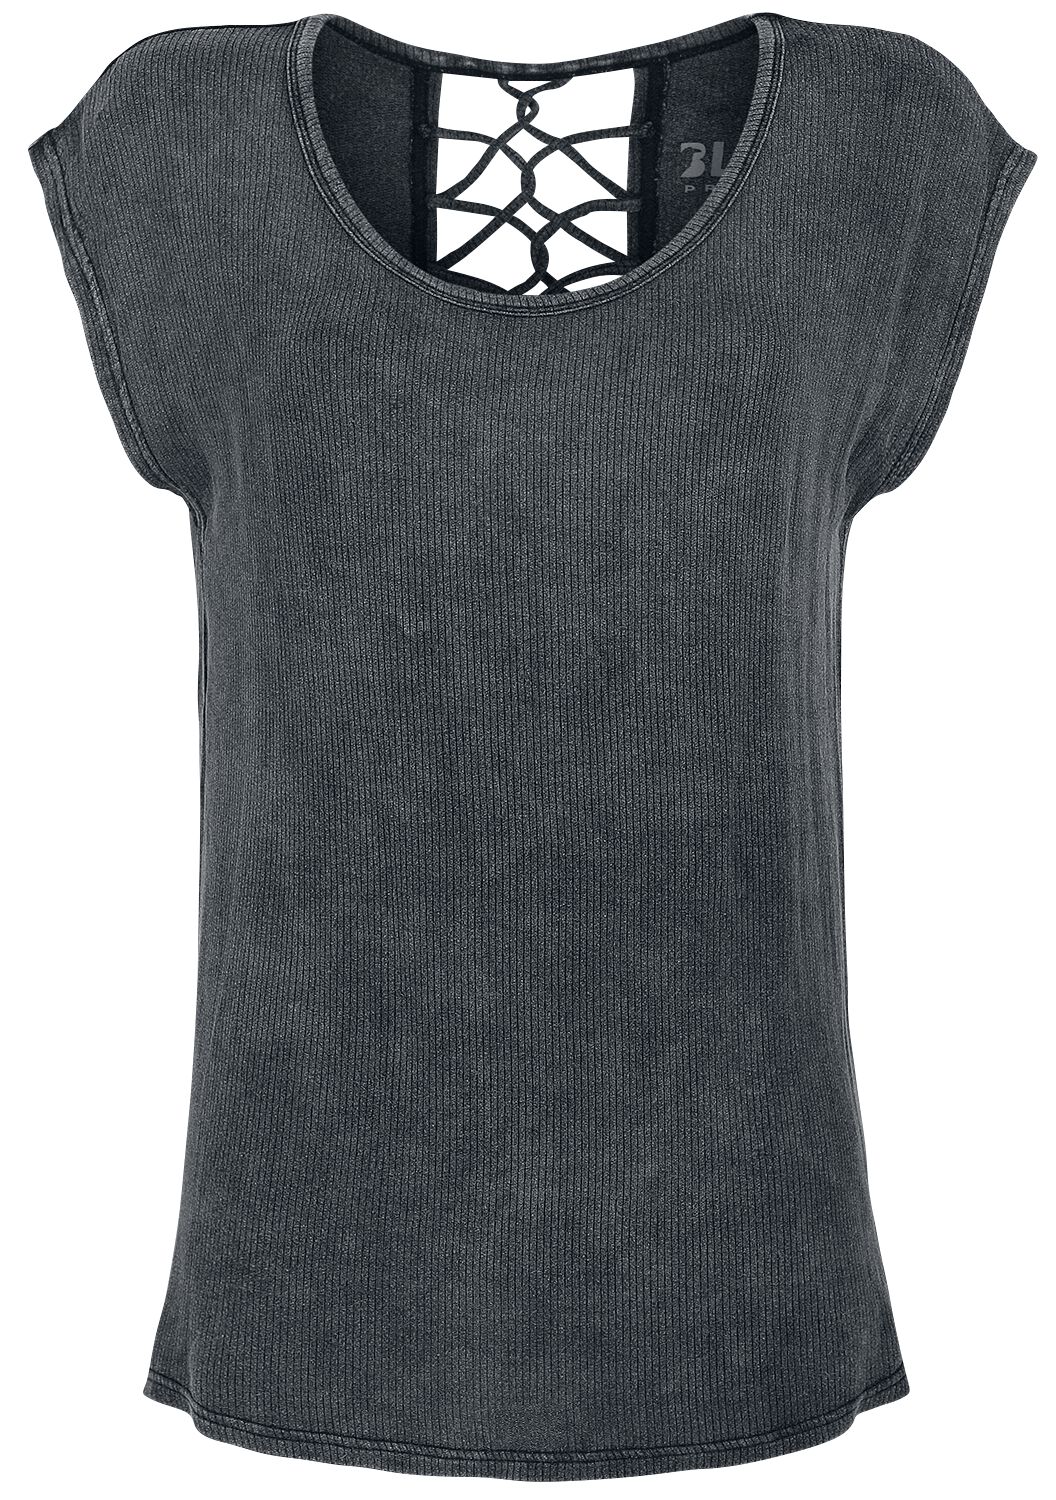 Image of T-Shirt di Black Premium by EMP - T-Shirt with Decorative Bands at the Back - XS a XL - Donna - nero